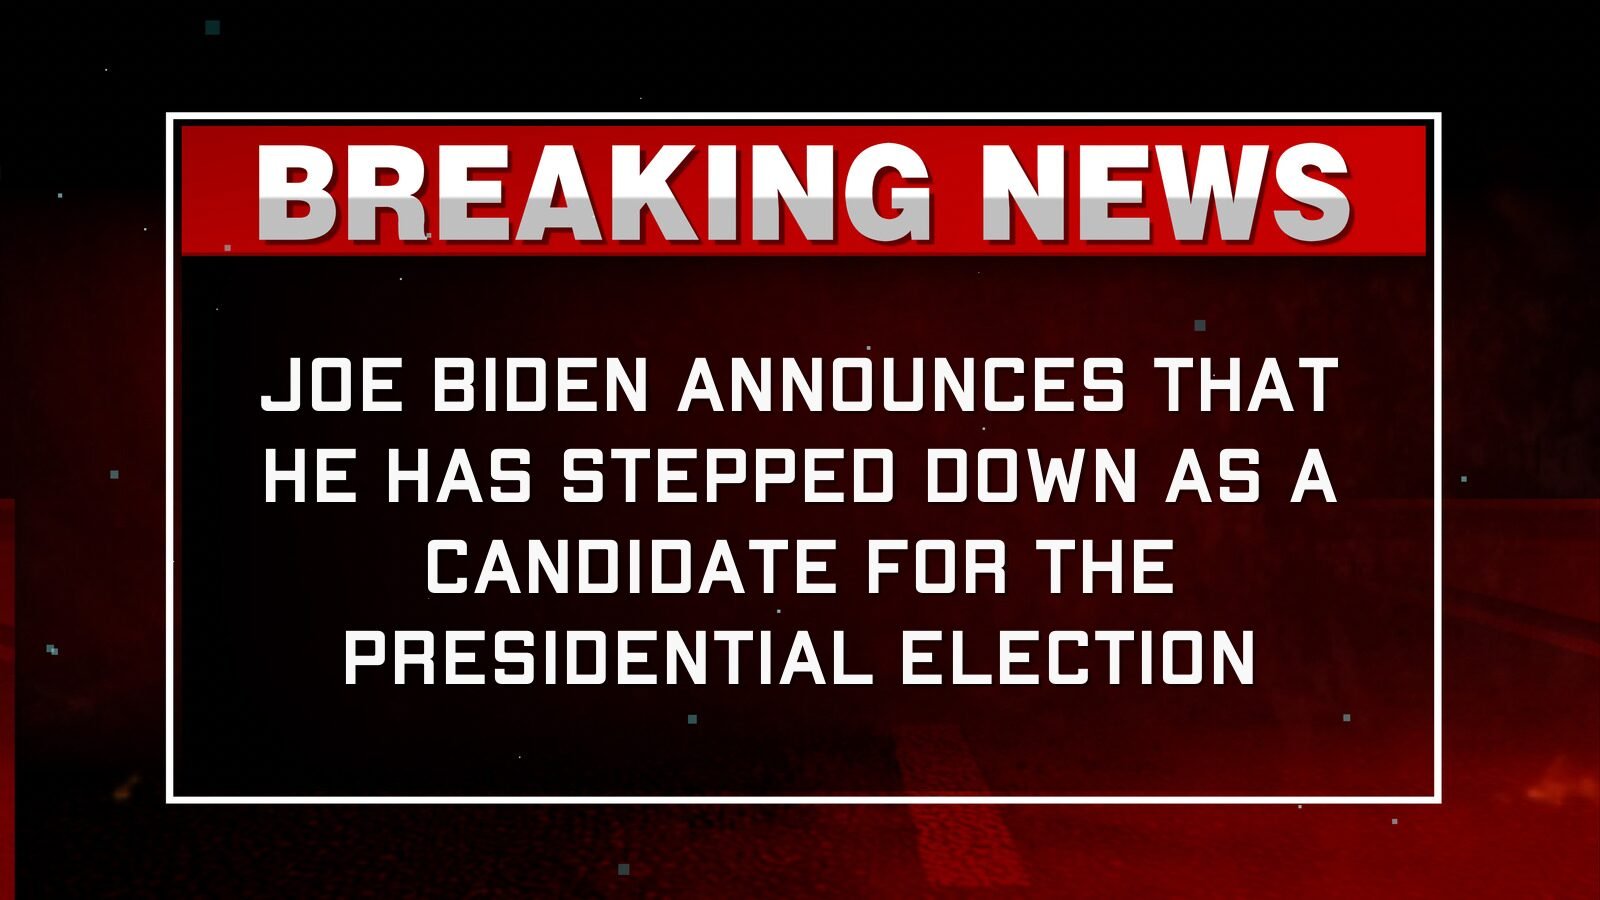 Joe Biden announces that he has stepped down as a candidate for the presidential election